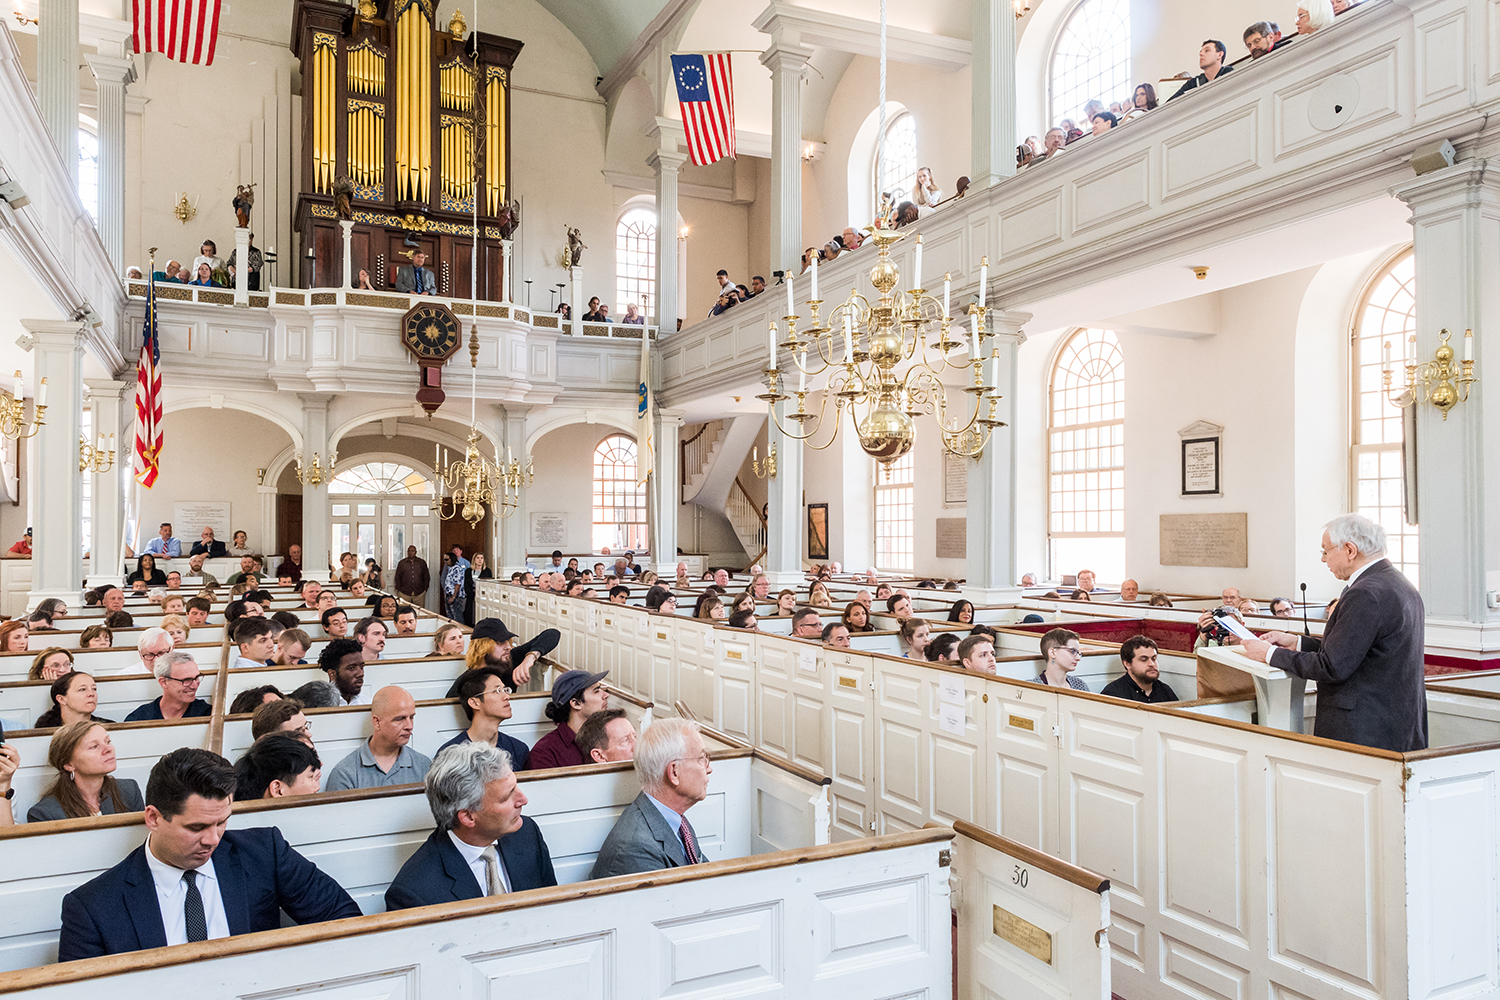 The graduation crowd at Old North Church